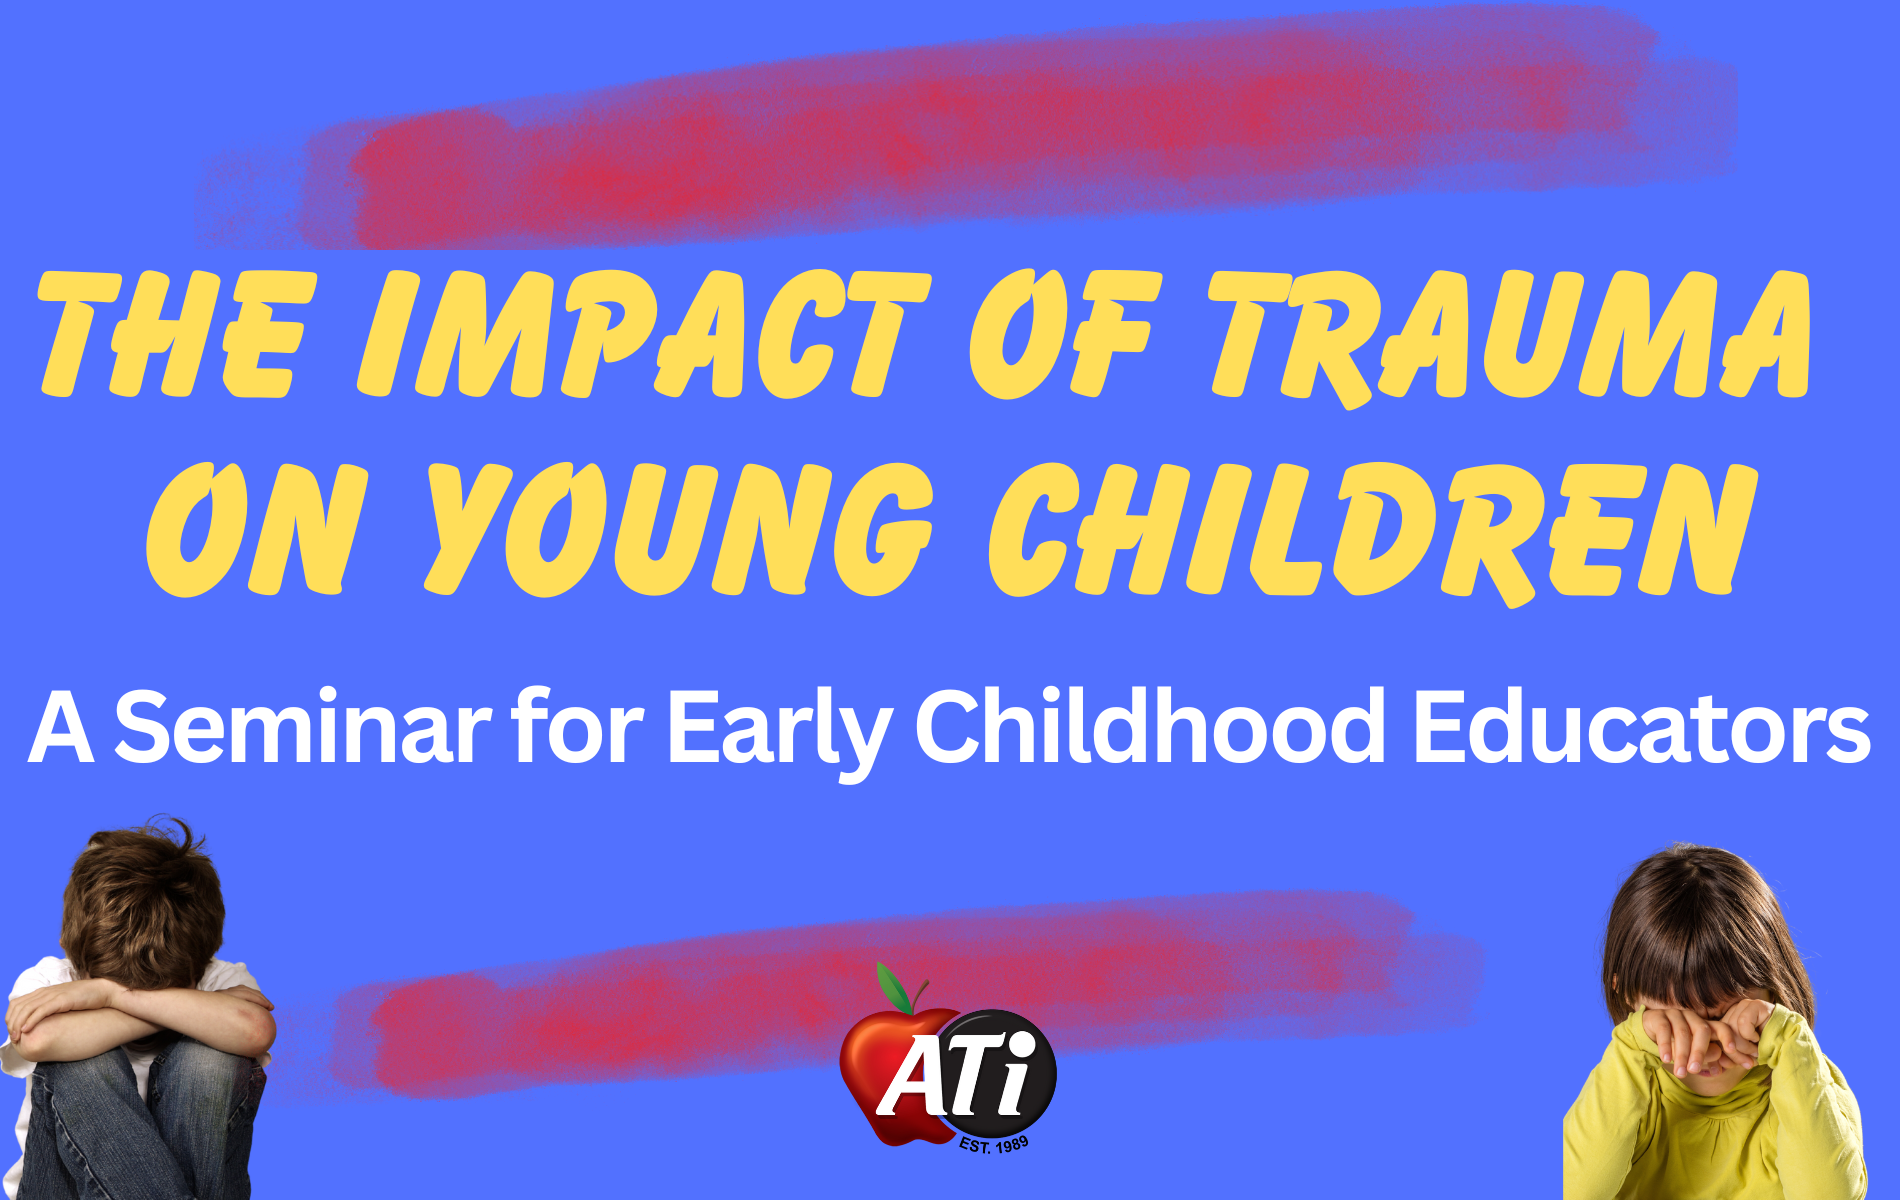 ATI's graphic The Impact of Trauma on Young Children online